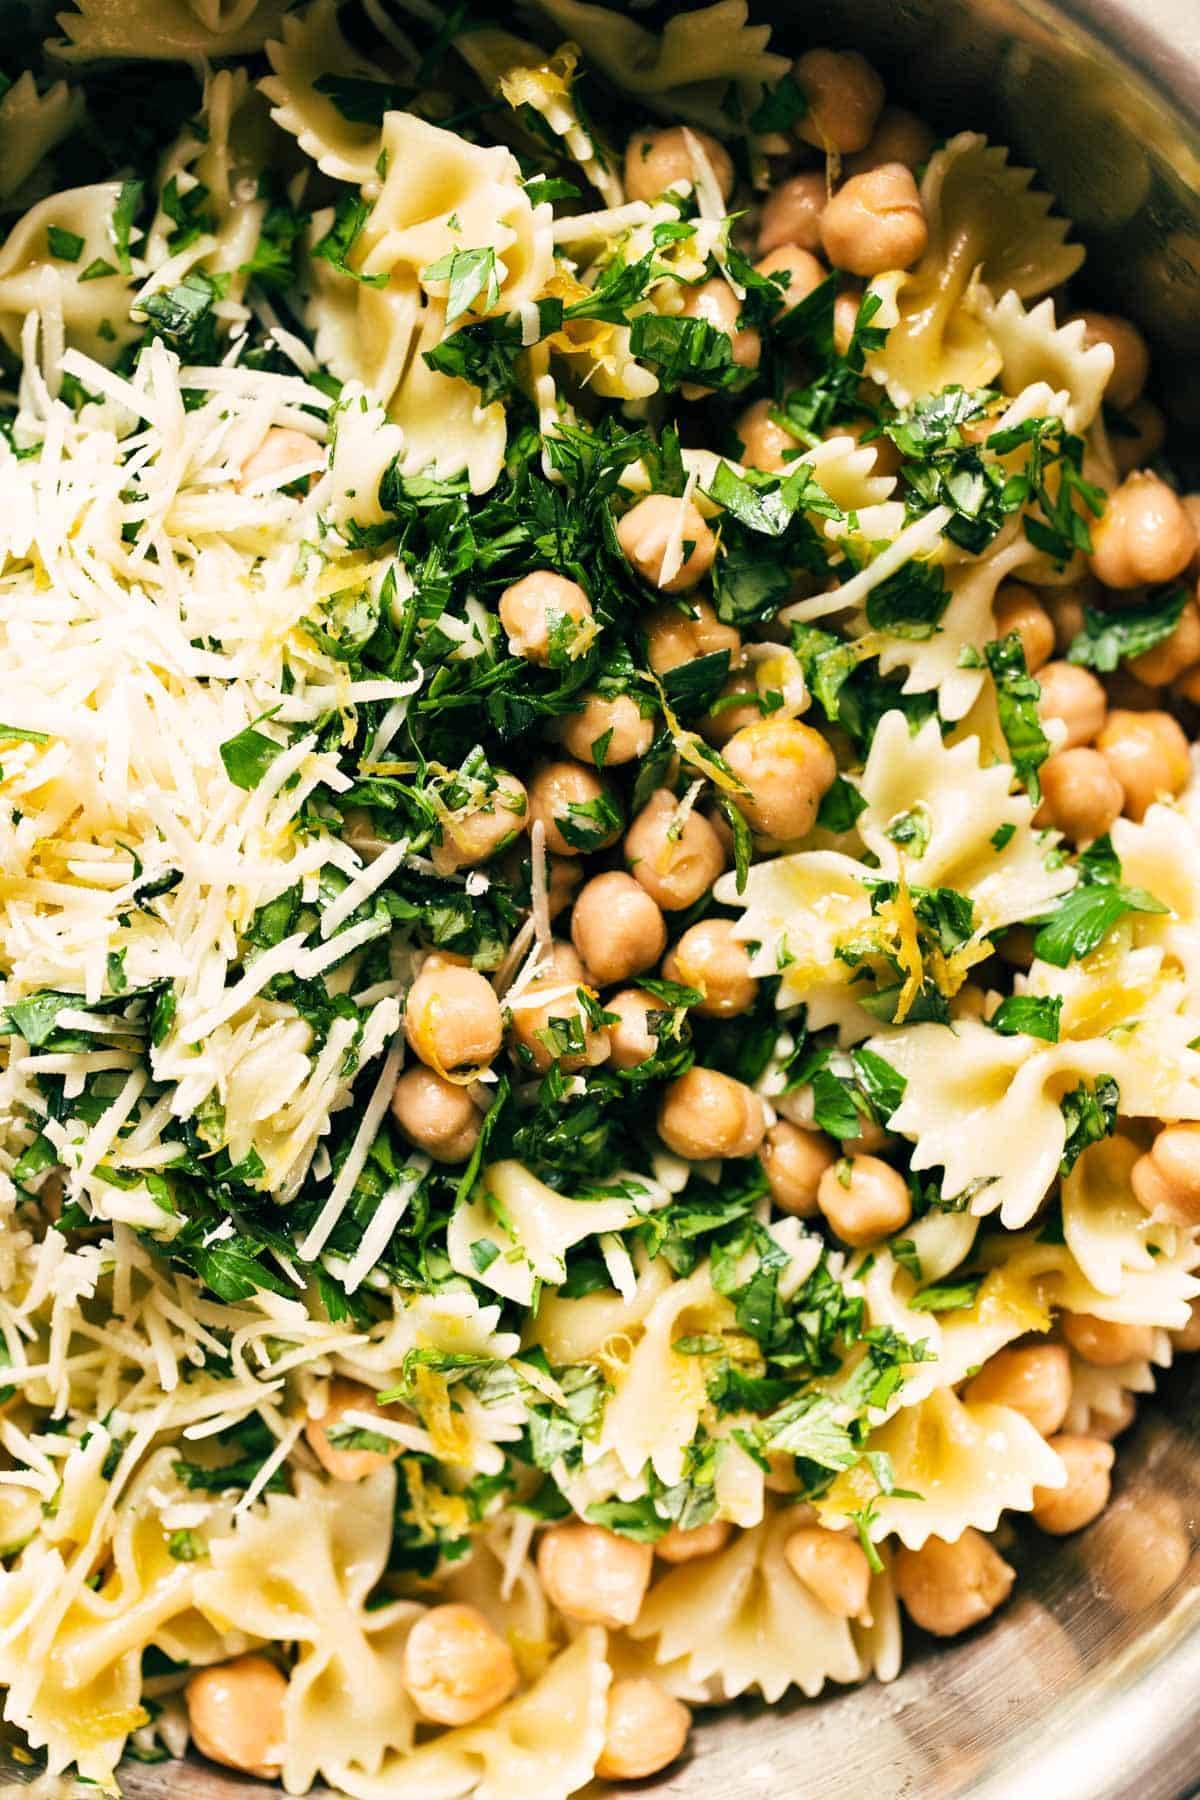 A bowl with pasta, chickpeas, herbs and cheese.